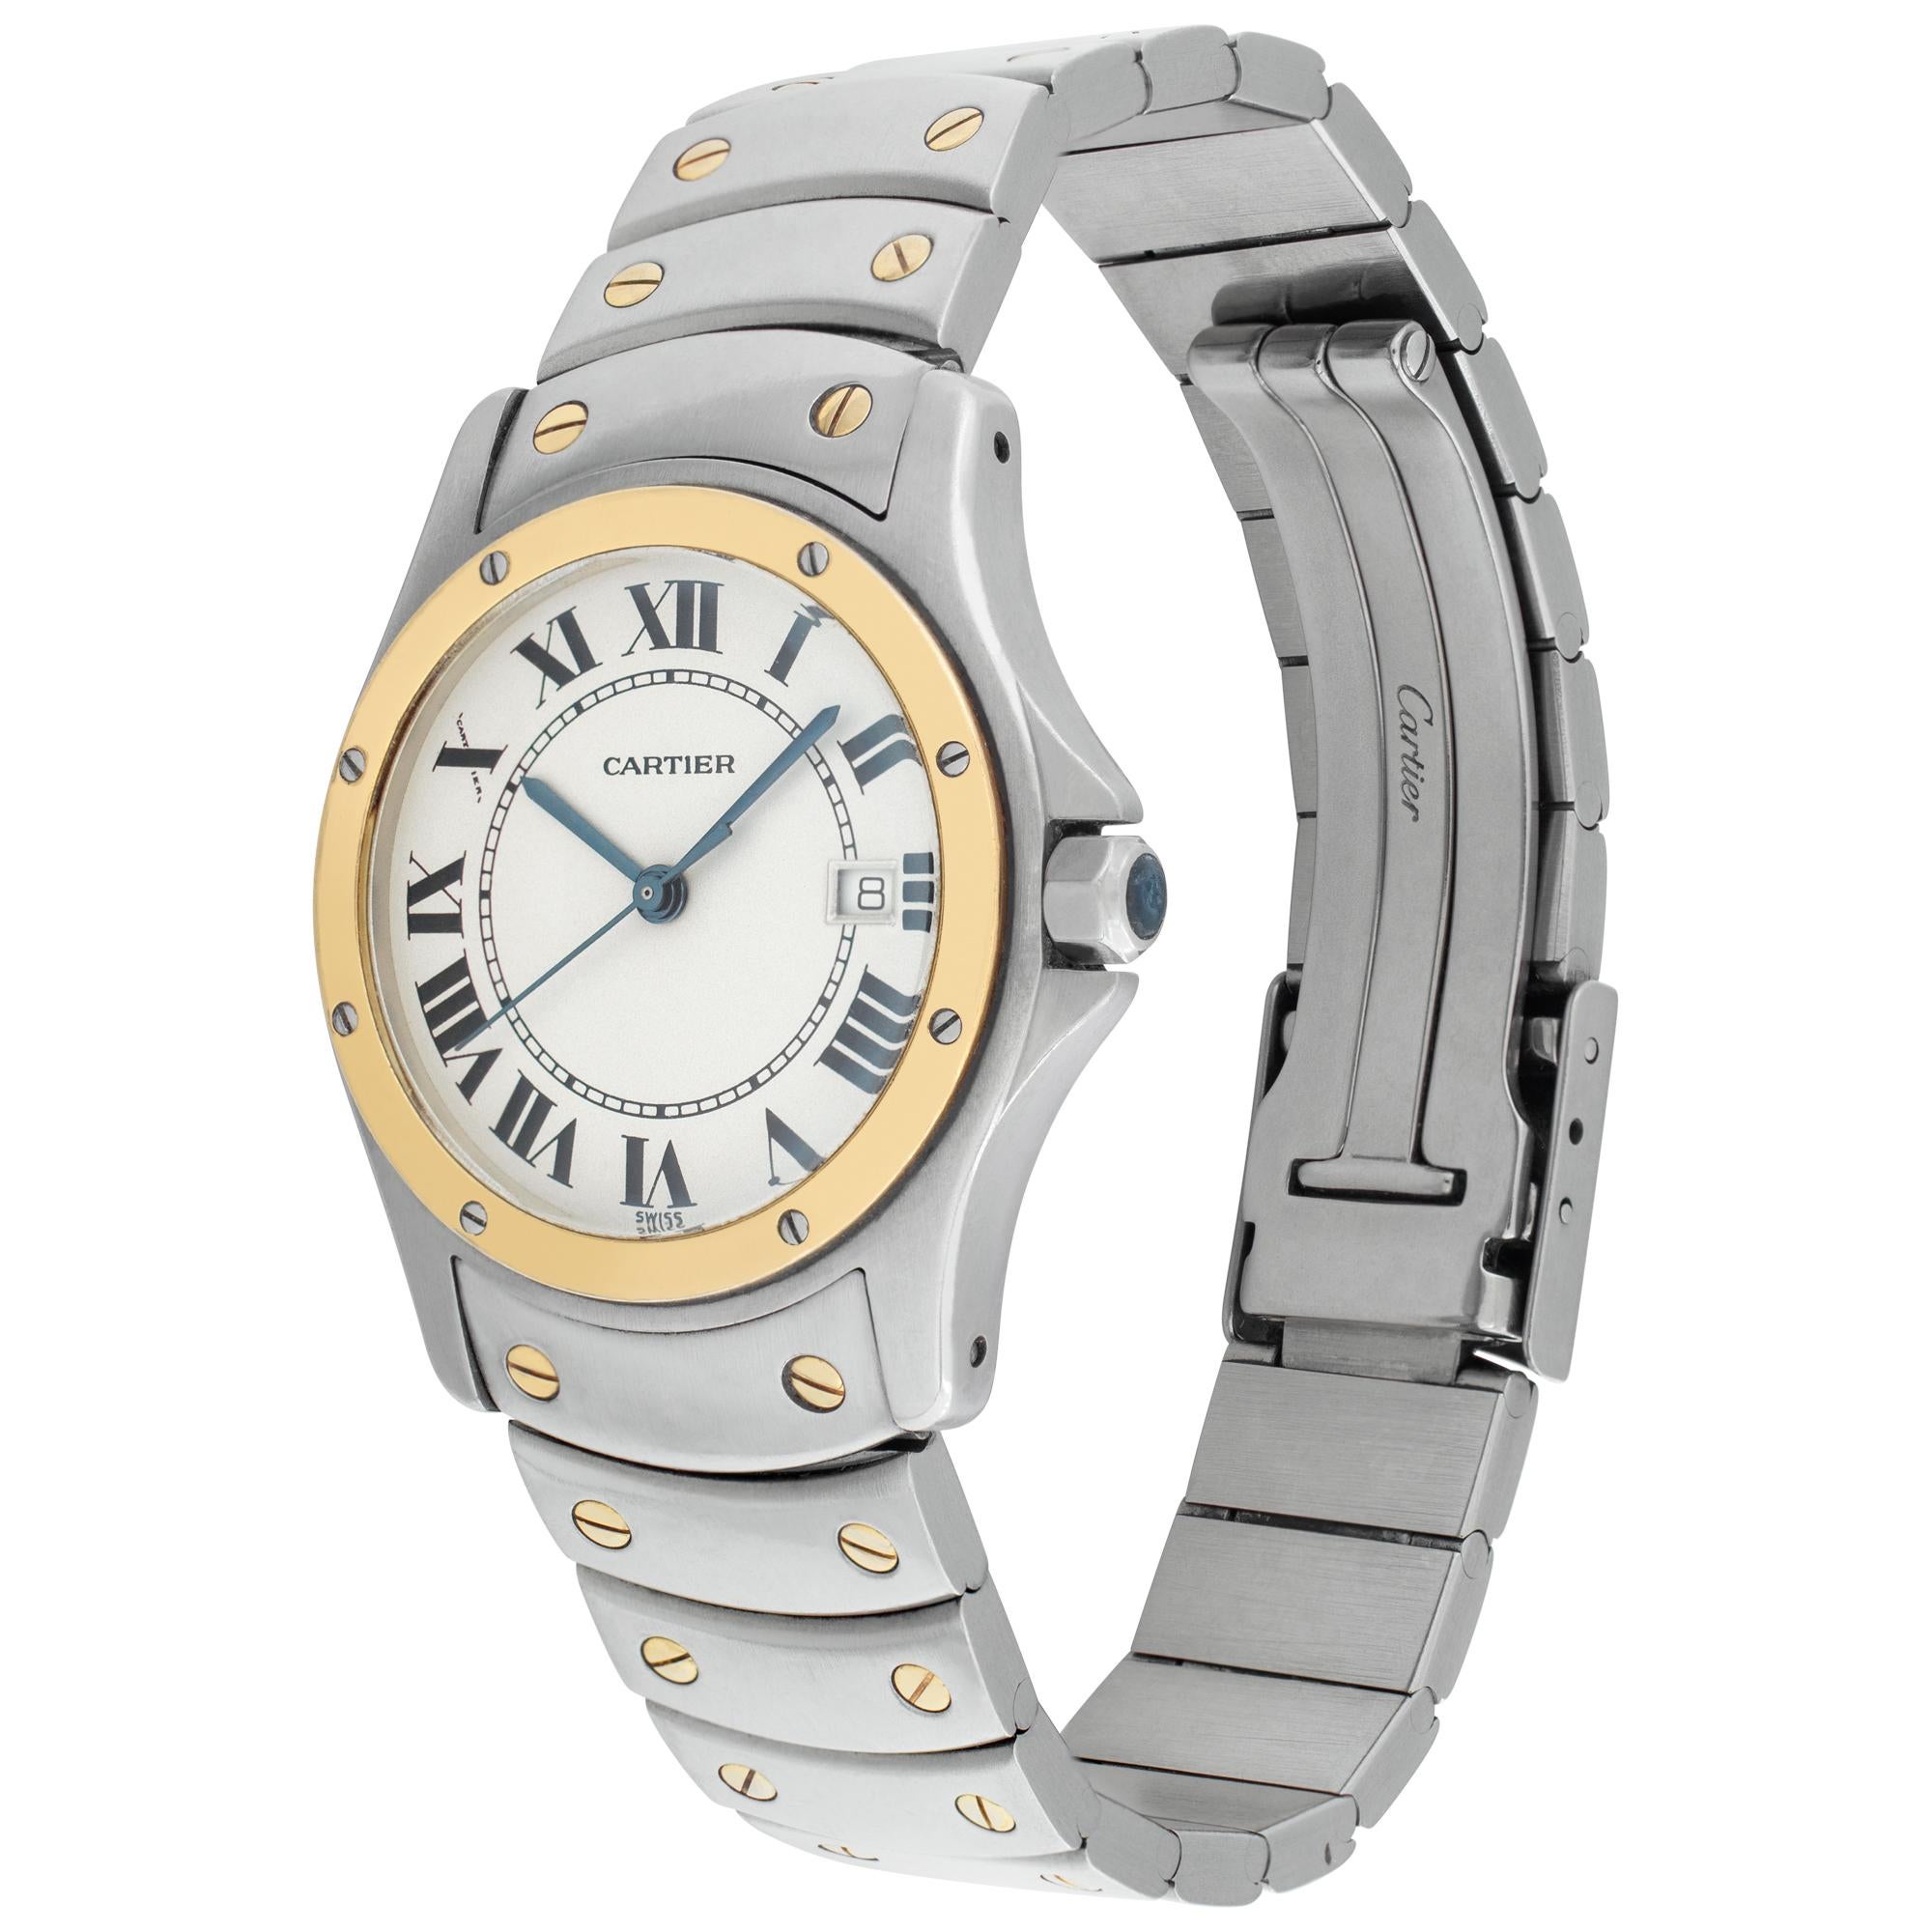 Cartier Cougar in 18k & stainless steel. Quartz w/ sweep seconds and date. 30 mm case size. With damaged box. Ref 1551. Circa 2000s. Fine Pre-owned Cartier Watch.

 Certified preowned Classic Cartier Cougar 1551 watch is made out of Gold and steel